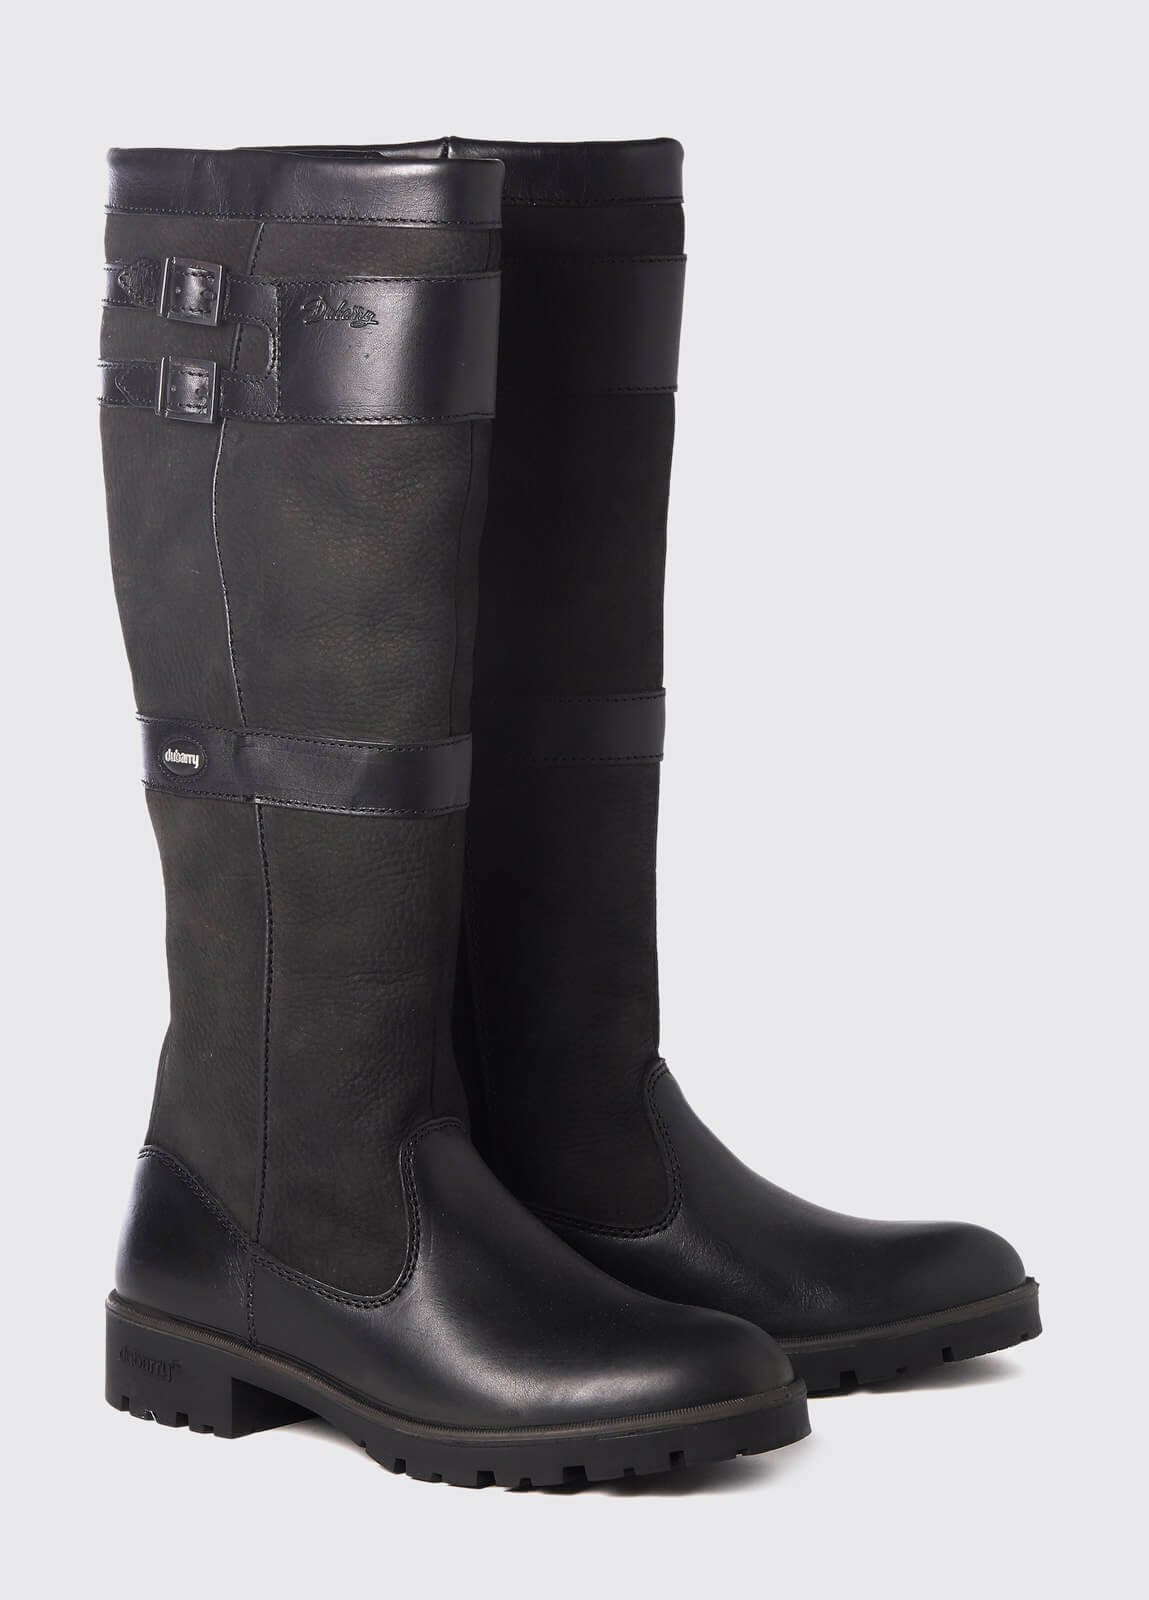 Pair of Dubarry Longford country boot, knee high black leather heeled boots with buckles